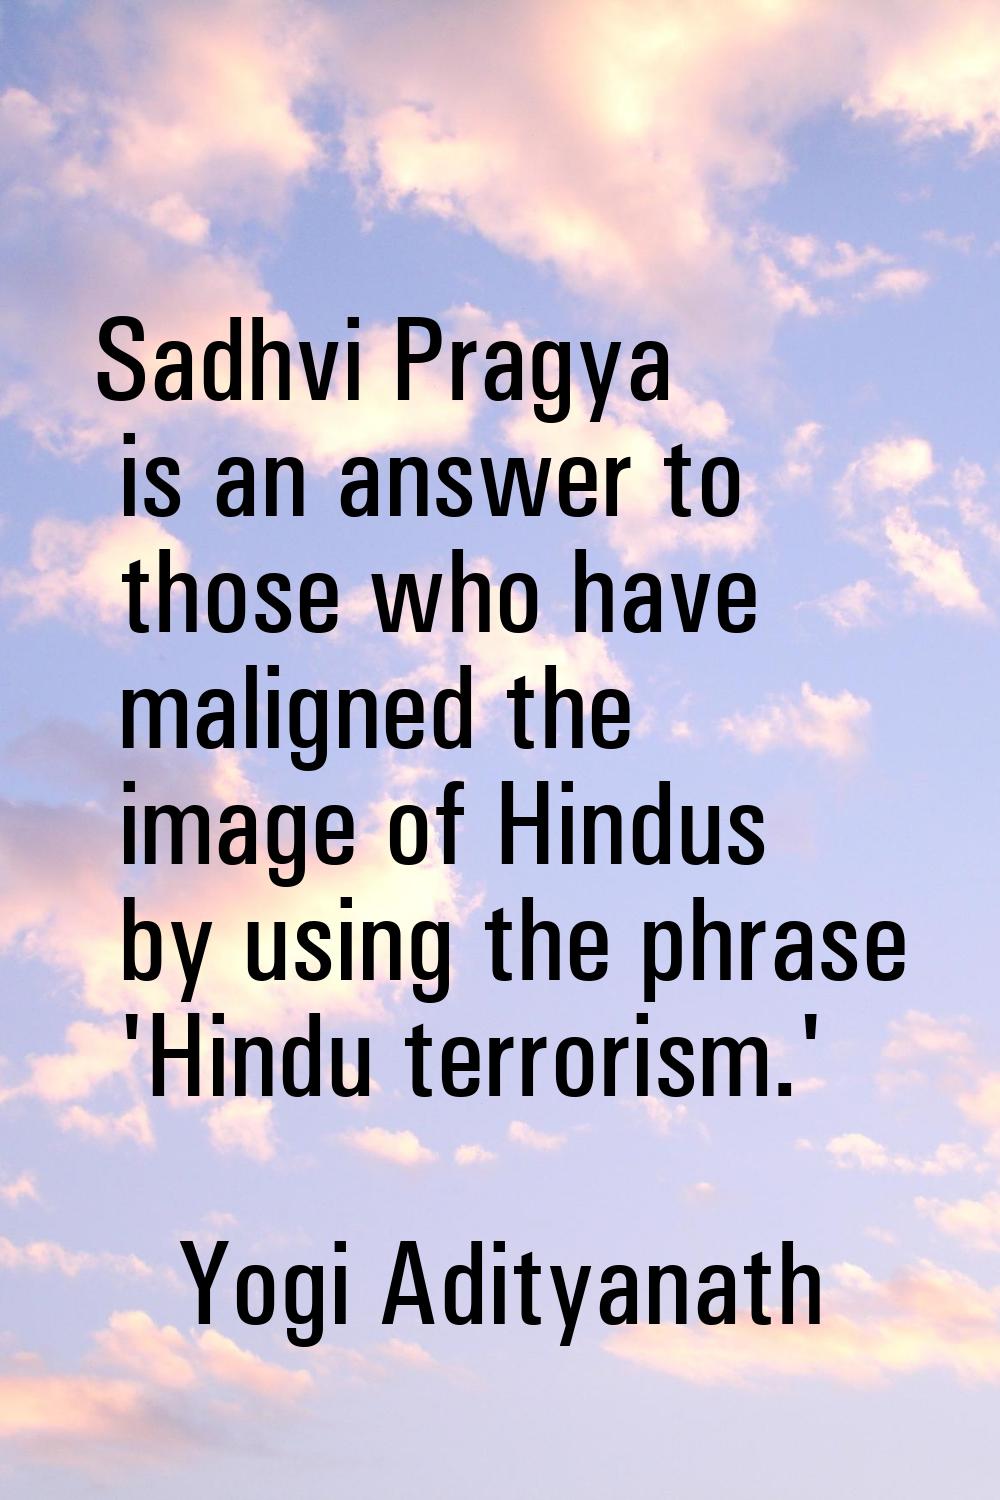 Sadhvi Pragya is an answer to those who have maligned the image of Hindus by using the phrase 'Hind